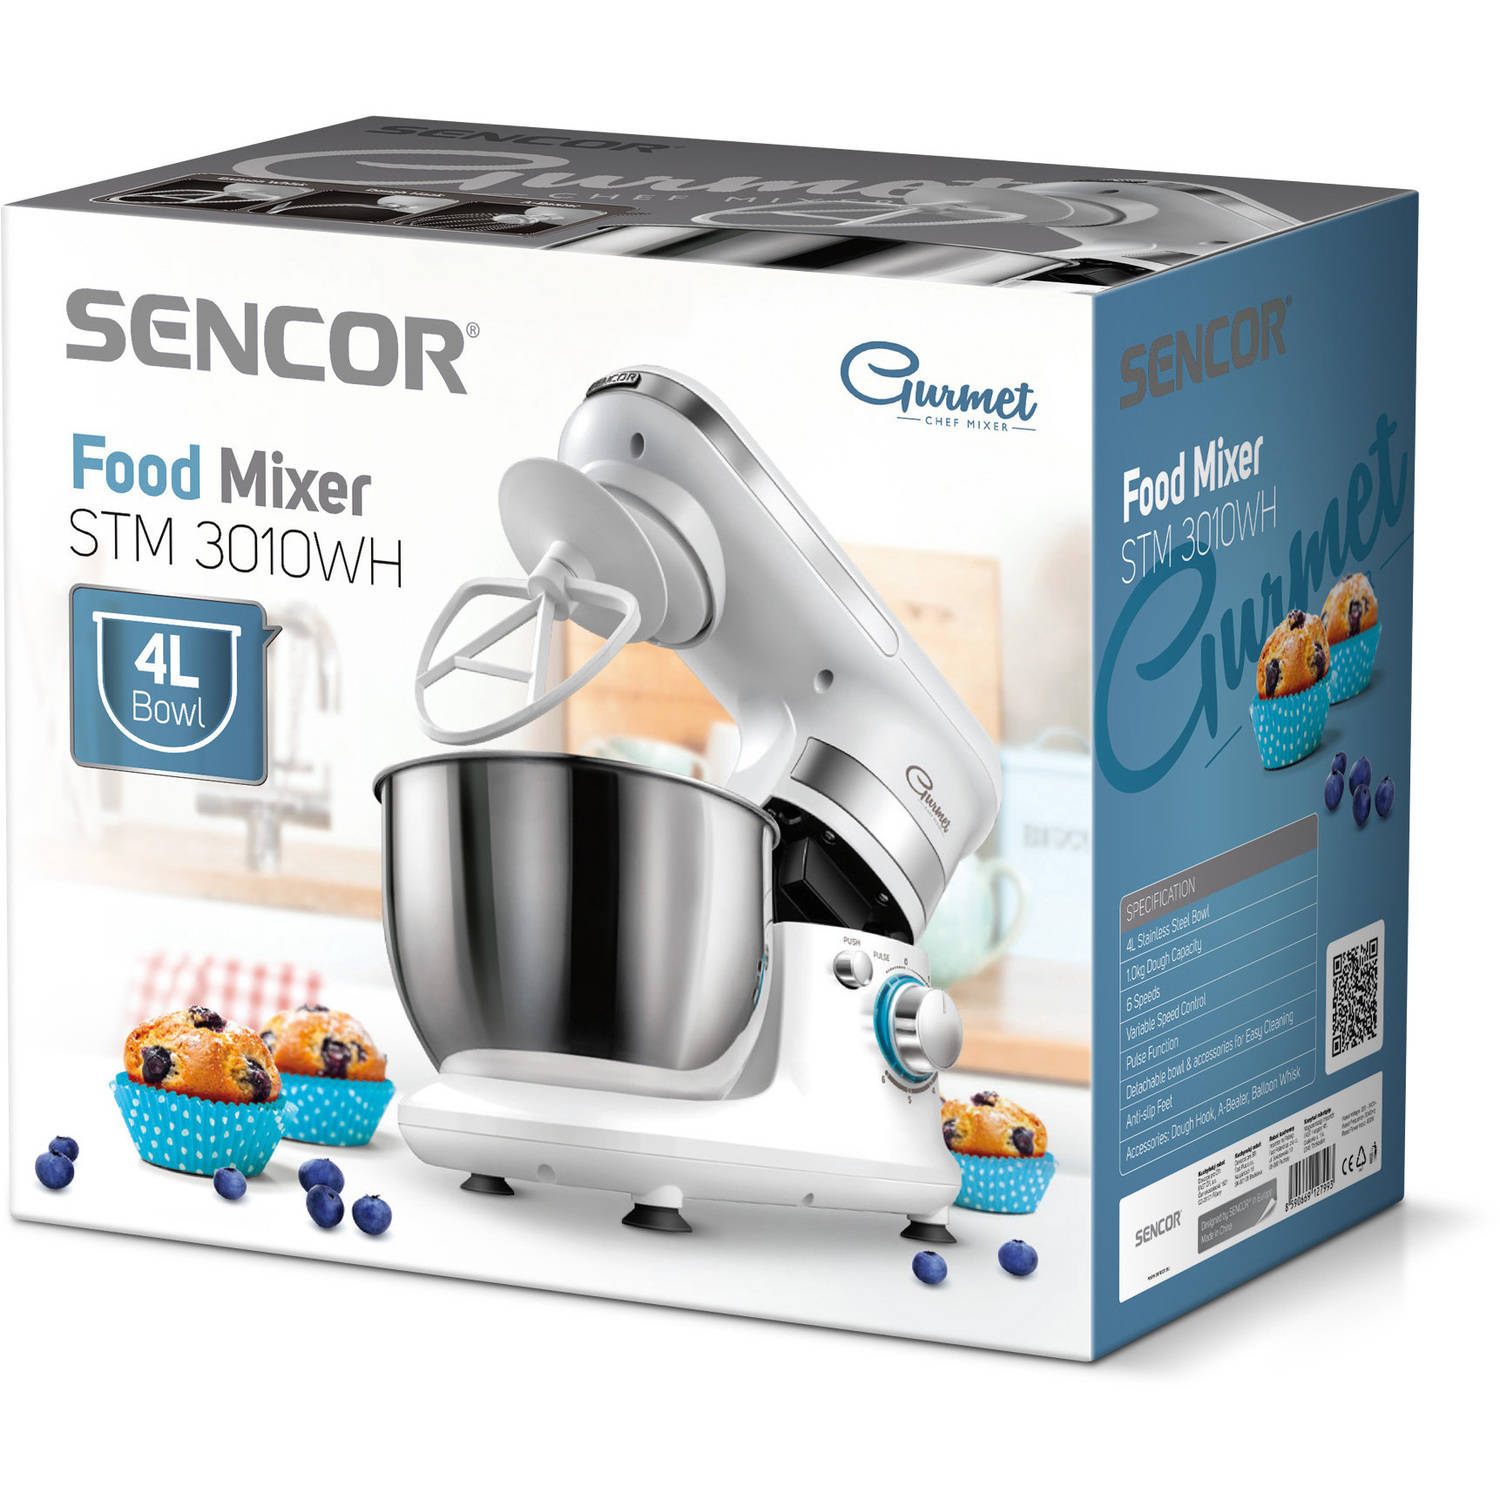 Sencor STM 3010WH 4.2 Quart 6 Speed Food Mixer with Stainless Steel Bowl, White - image 3 of 3